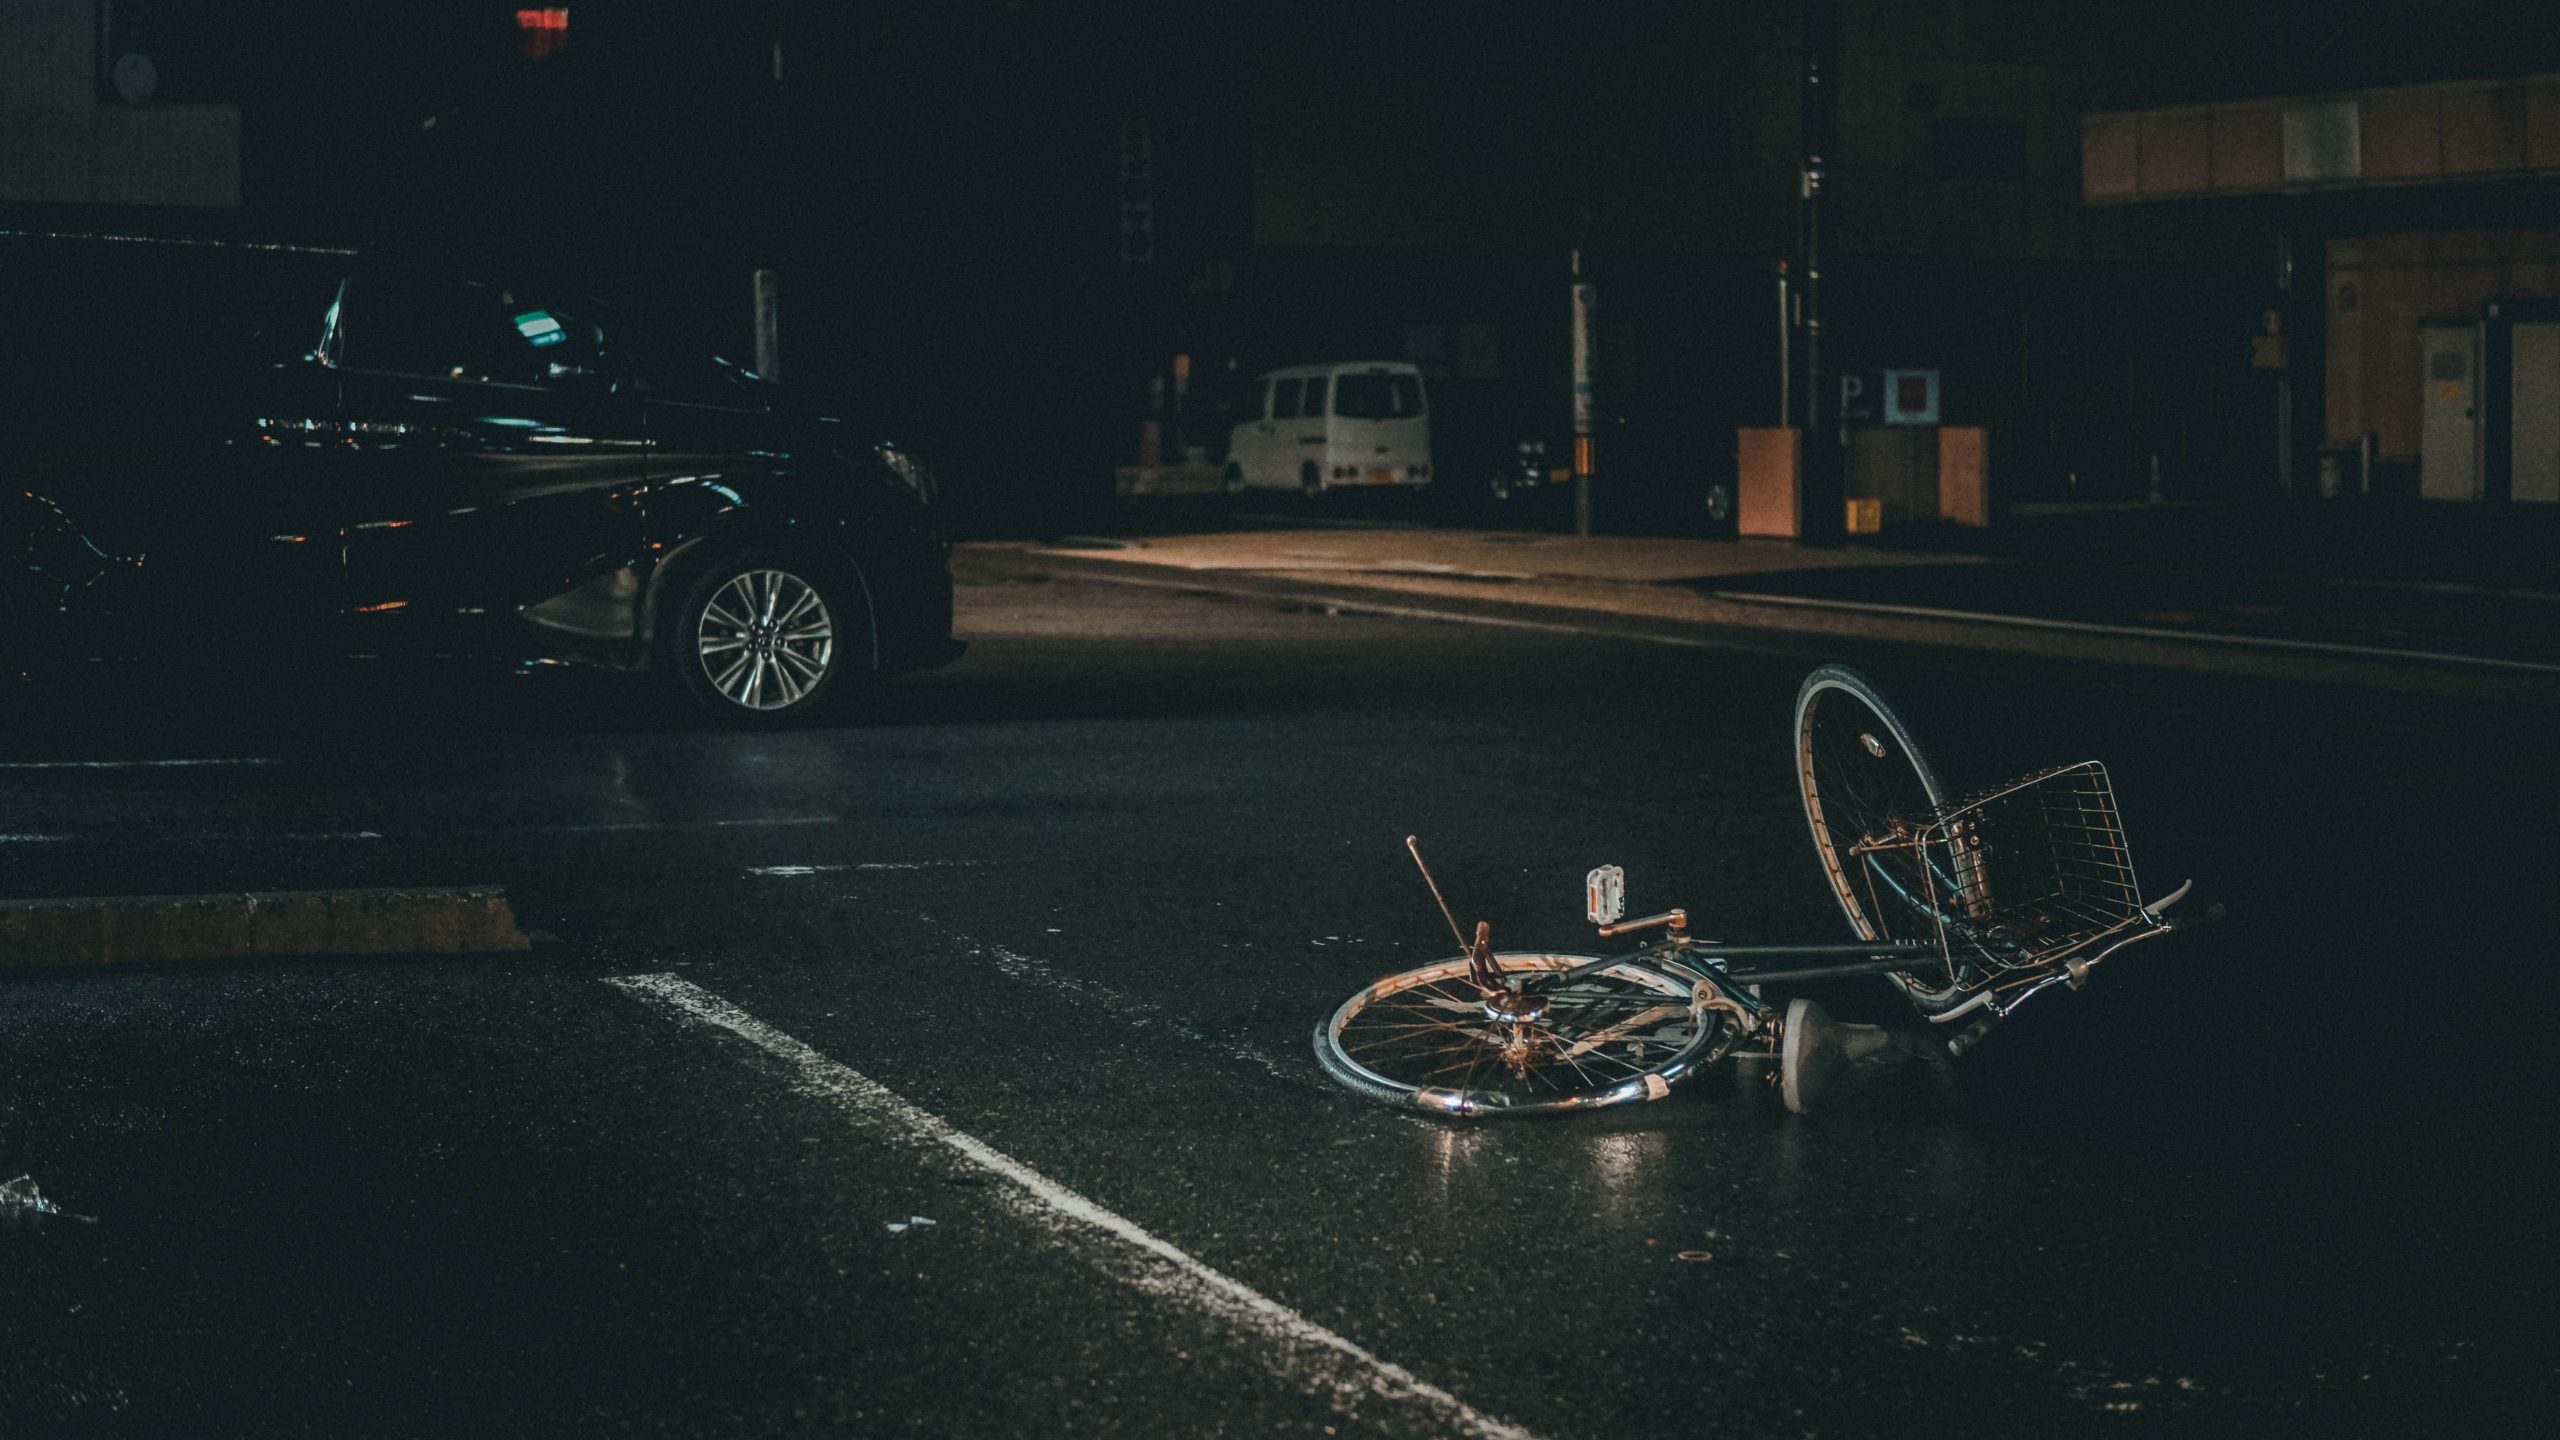 Image of a bike accident for my post on bike safety and ghost bikes